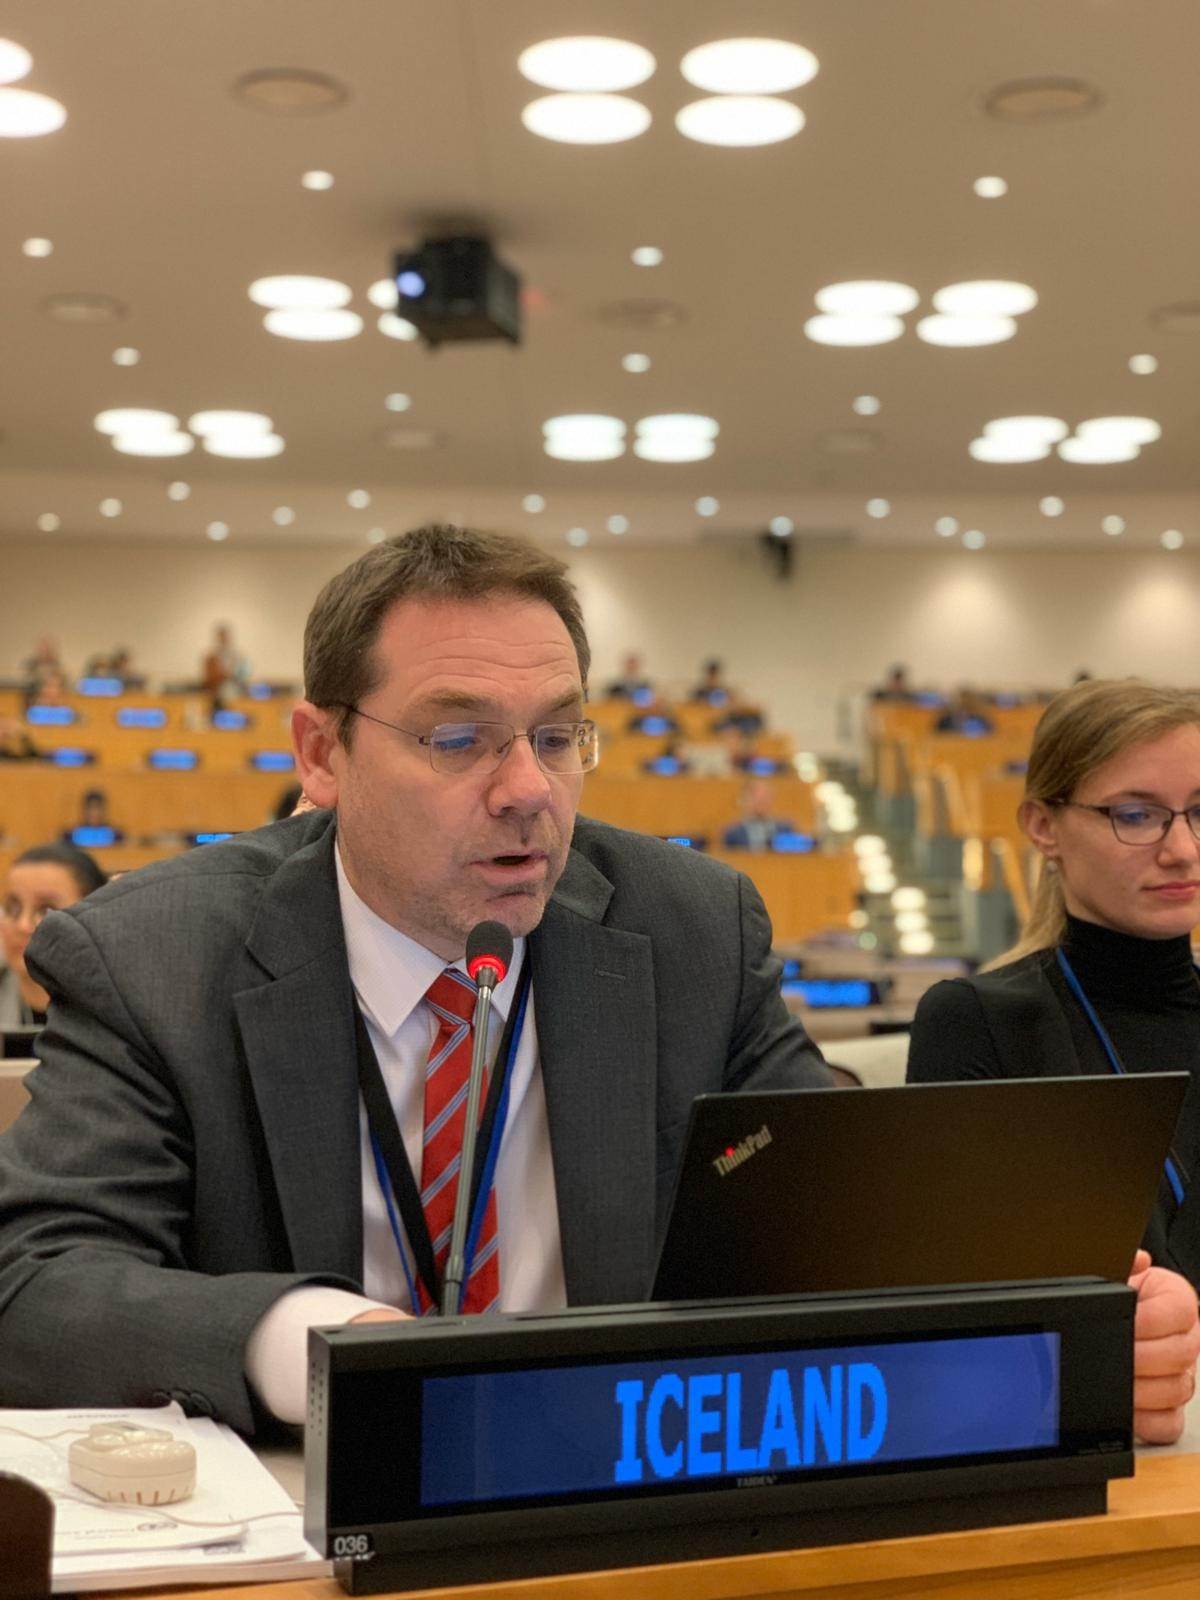 Statement by Davíð Logi Sigurðsson, Director for Human Rights to the Third Committee - mynd